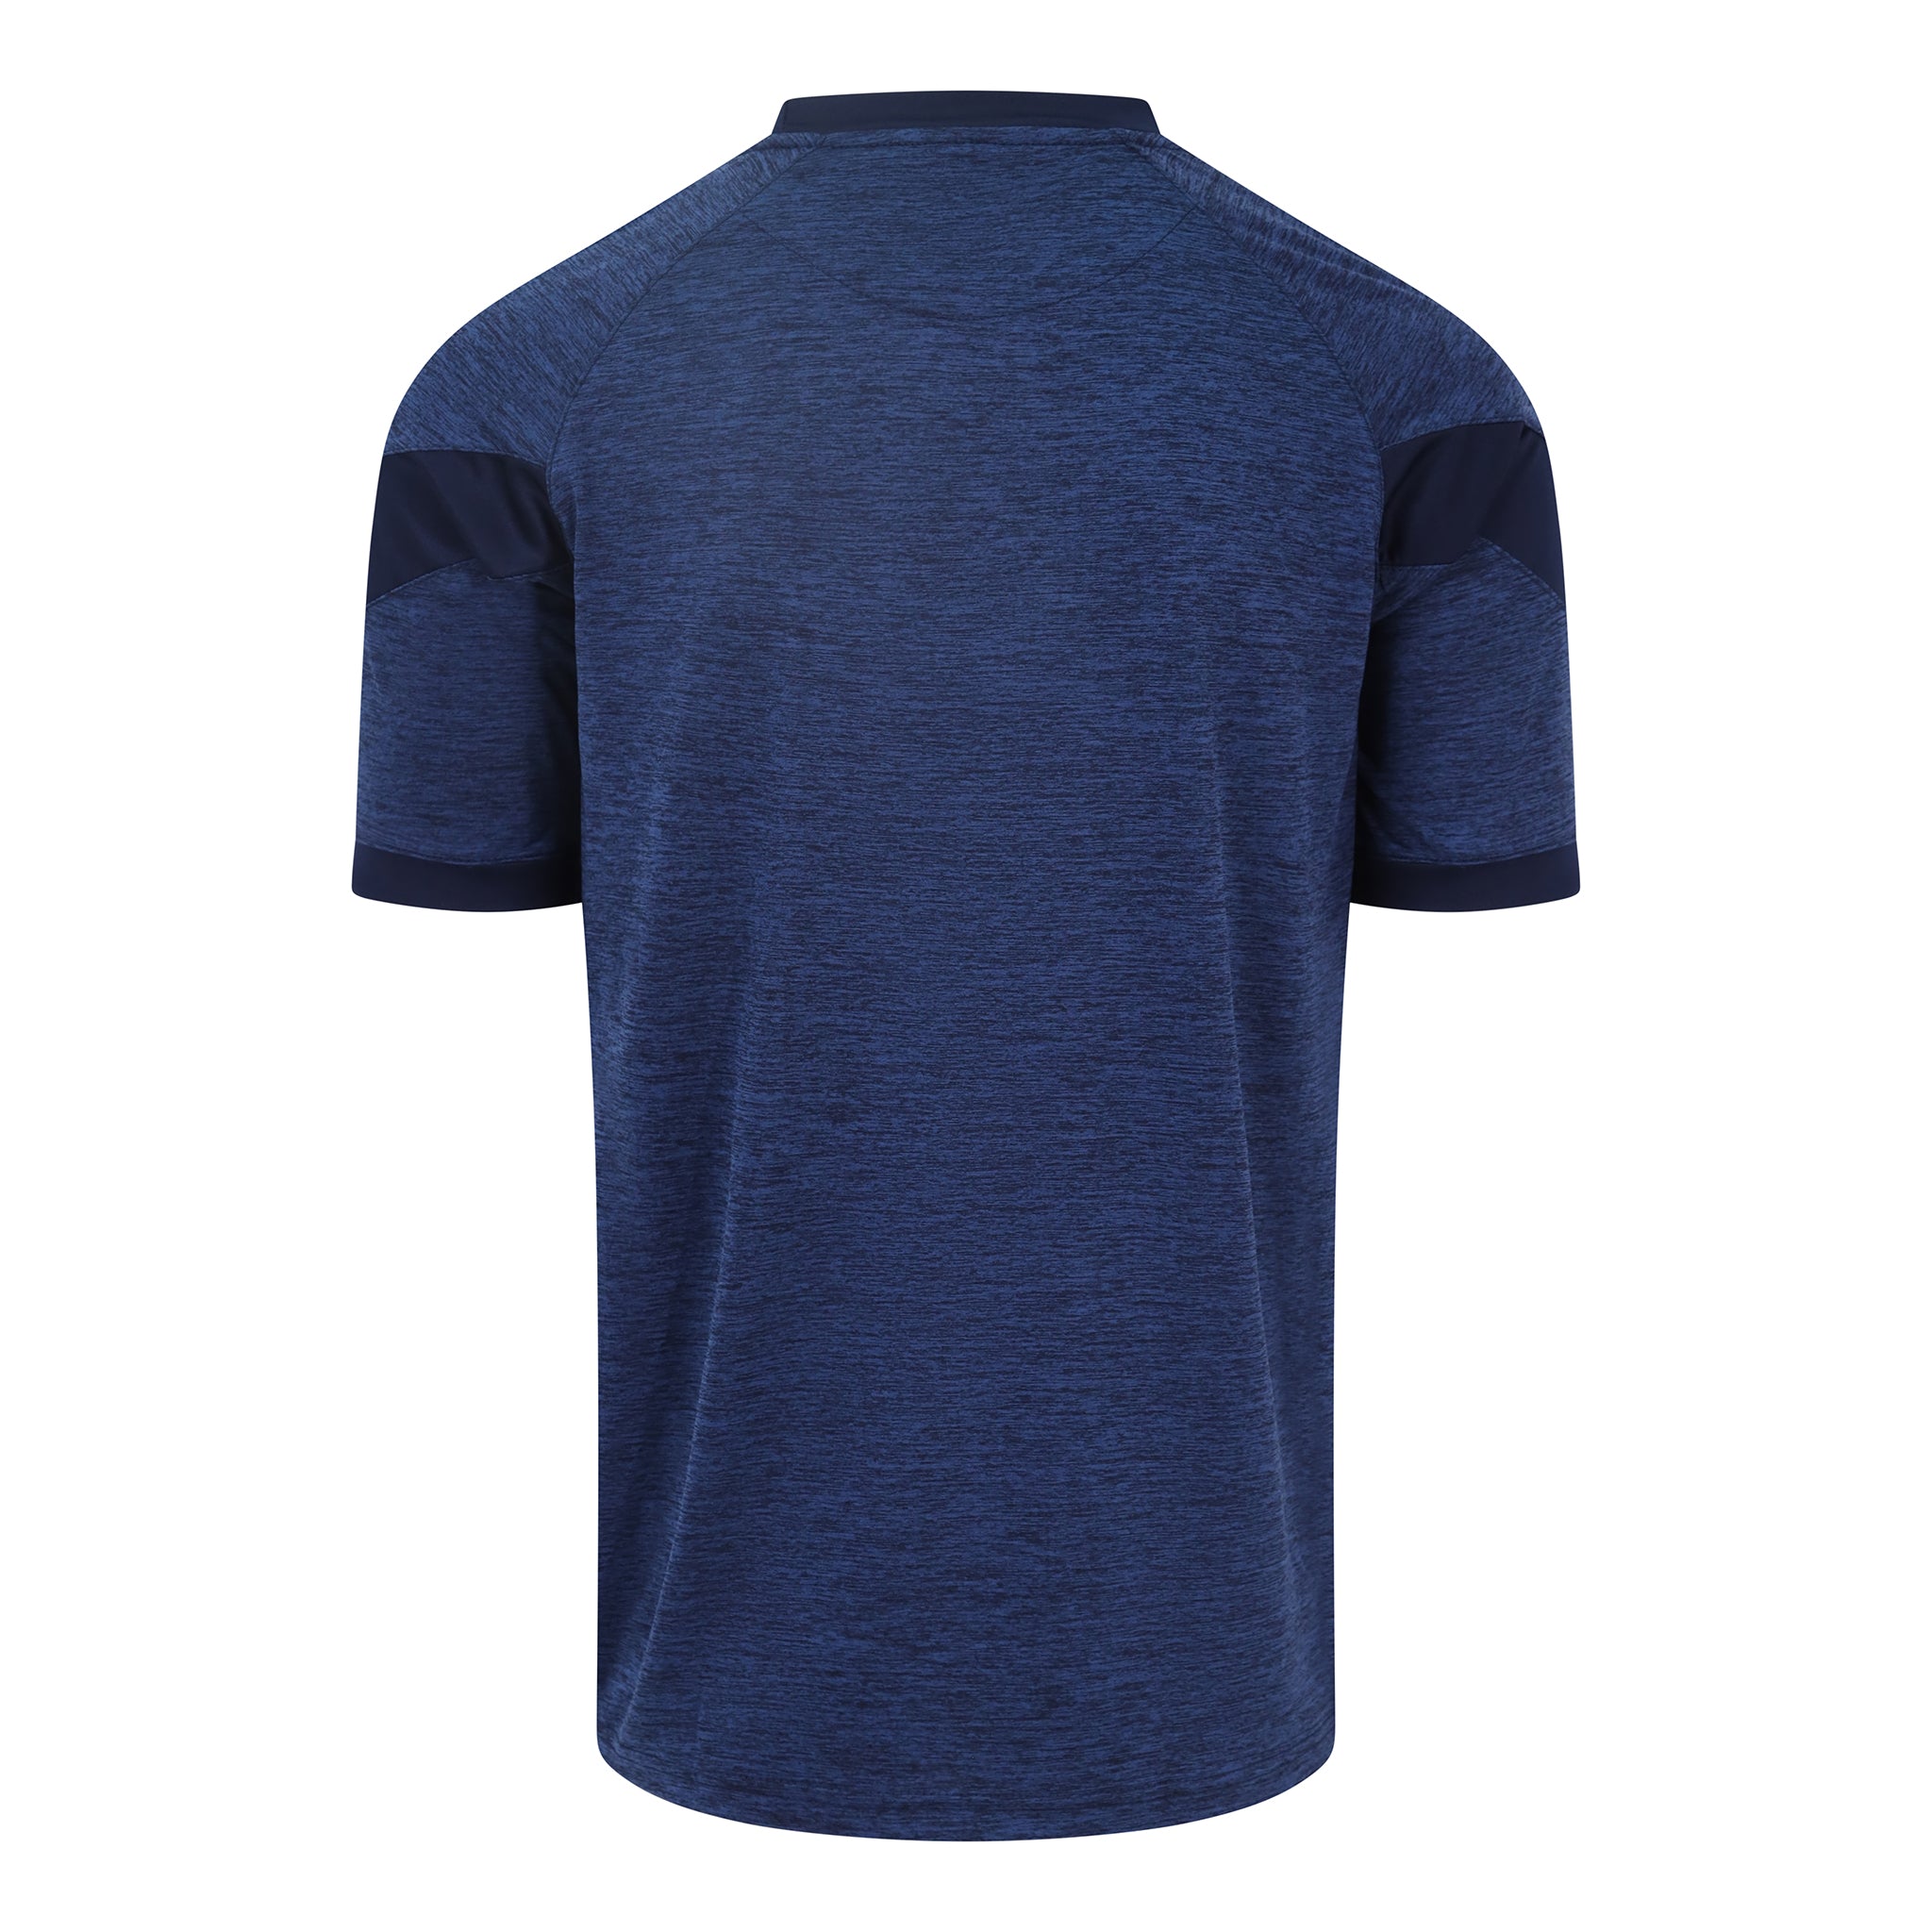 Mc Keever Core 22 T-Shirt - Adult - Navy